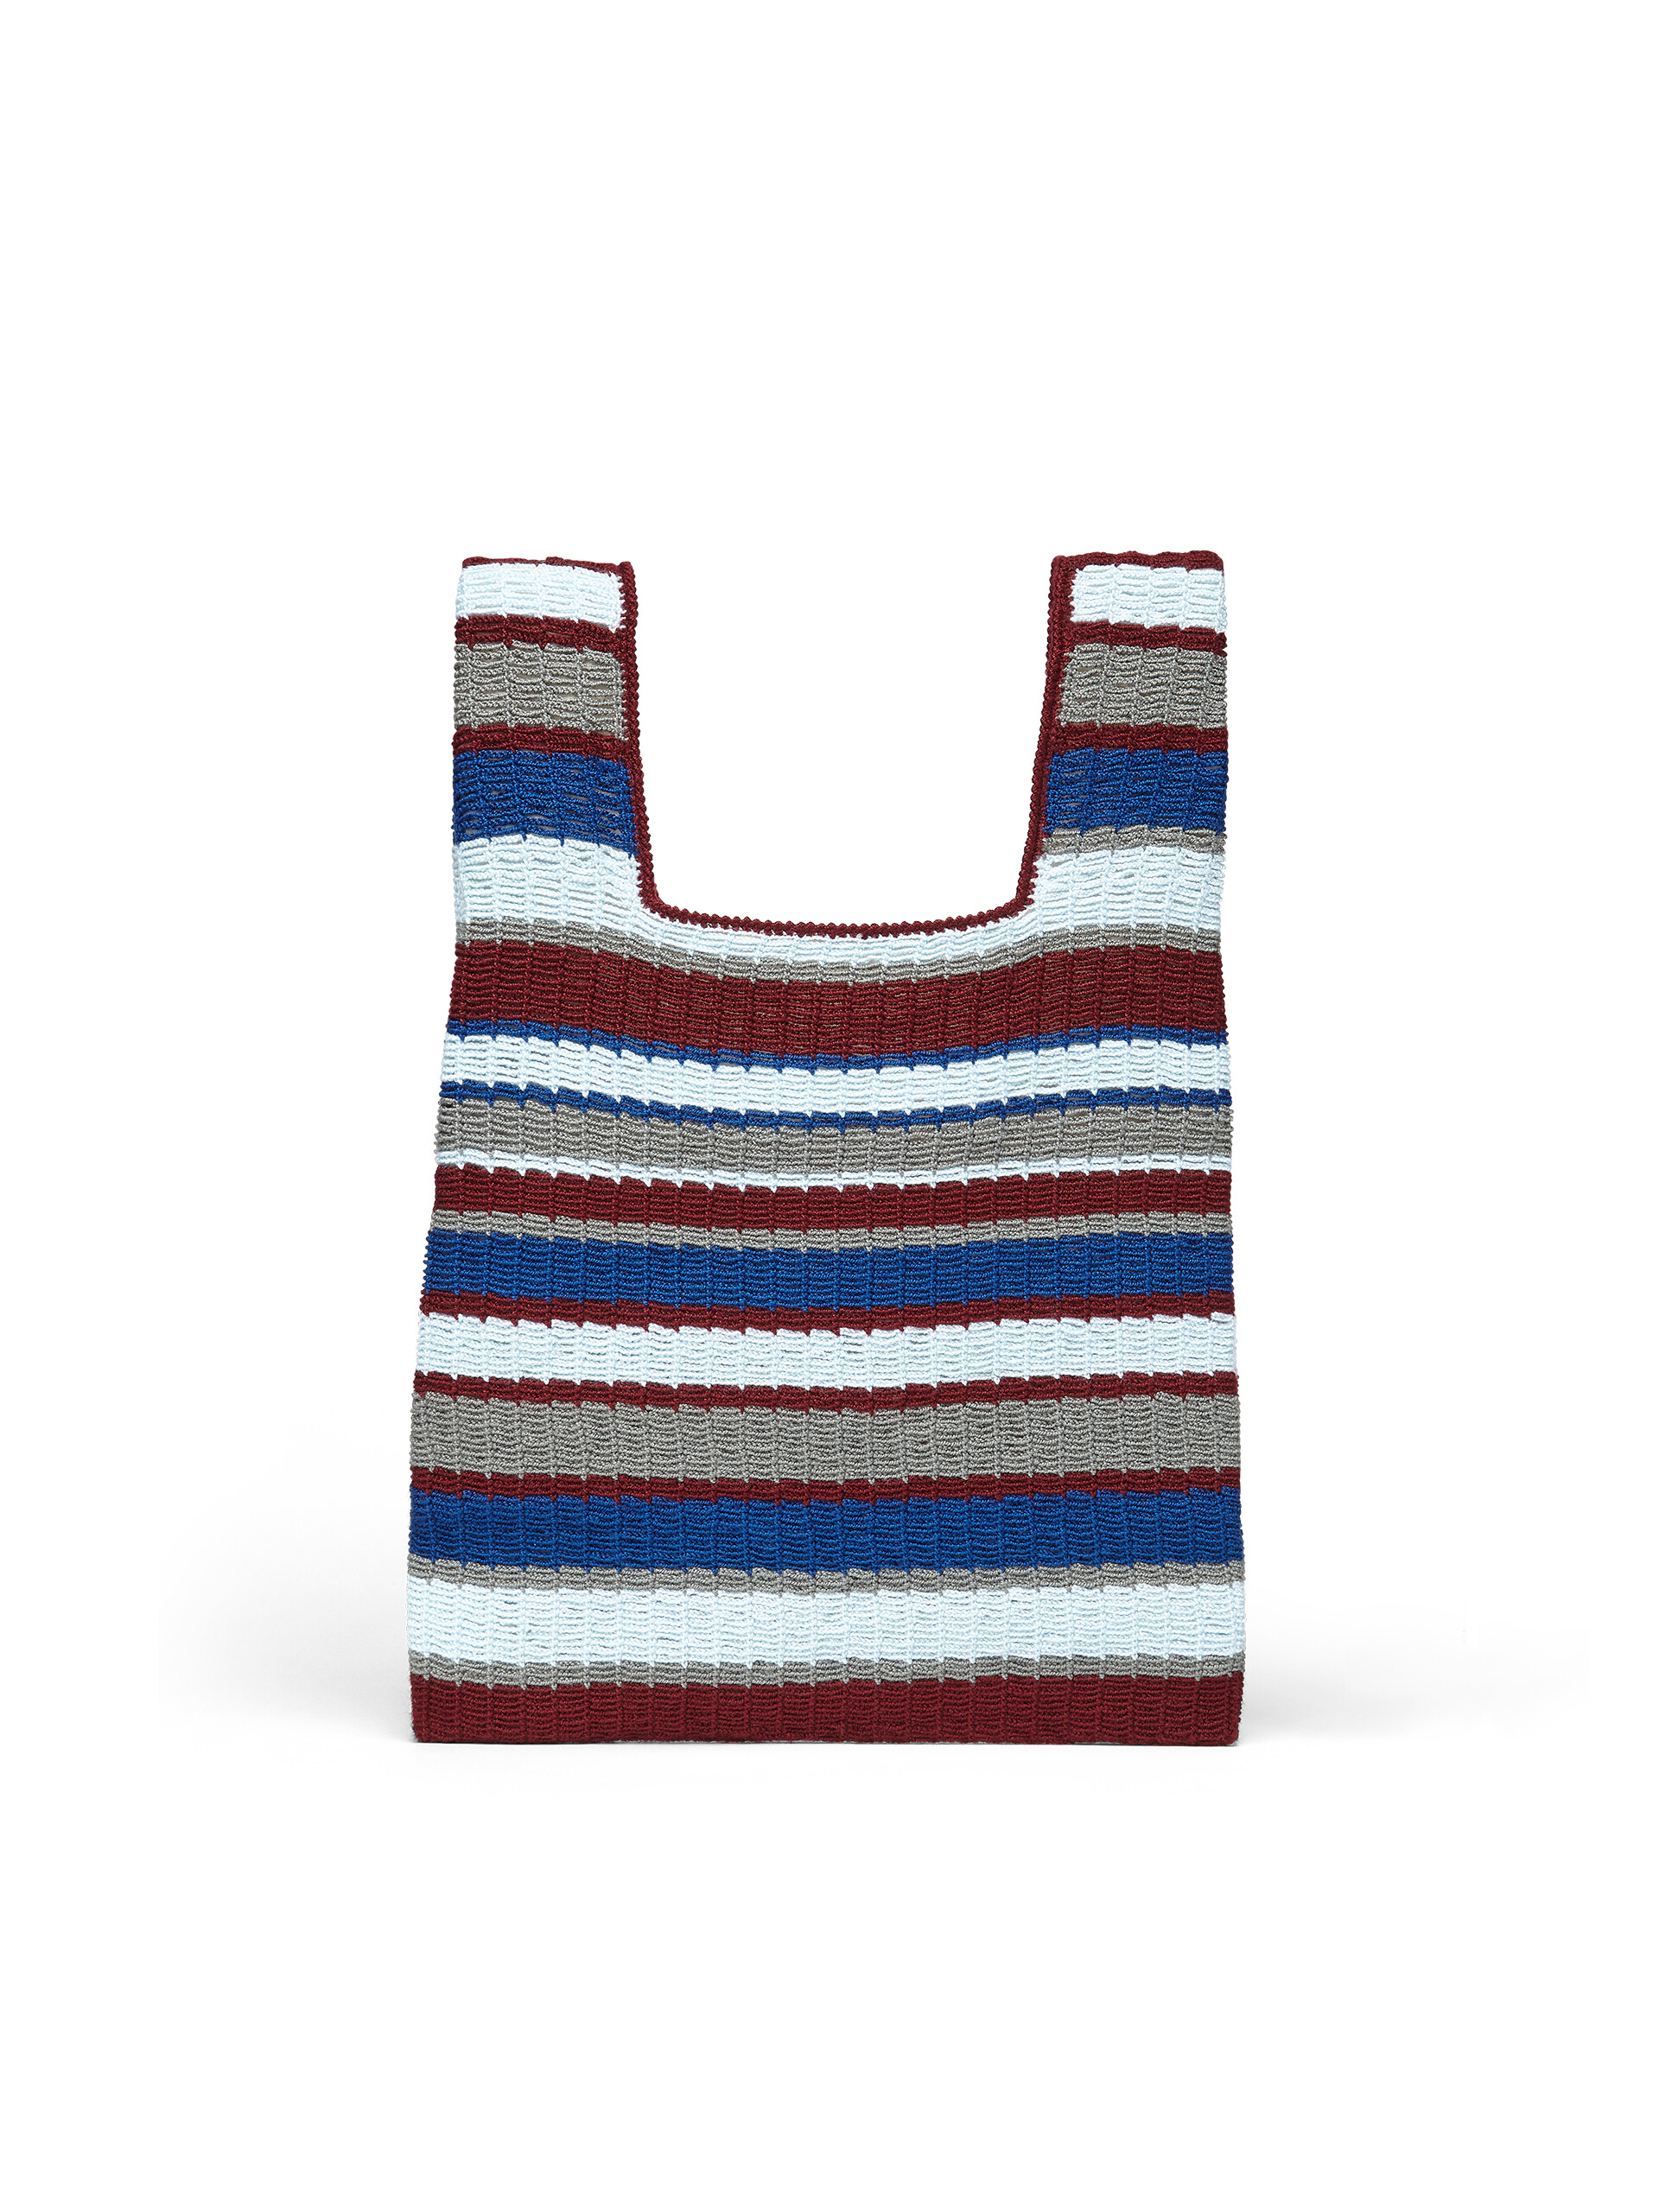 Shopping bag MARNI MARKET with striped motif in burgundy blue grey and pale blue crochet polyester - Bags - Image 3